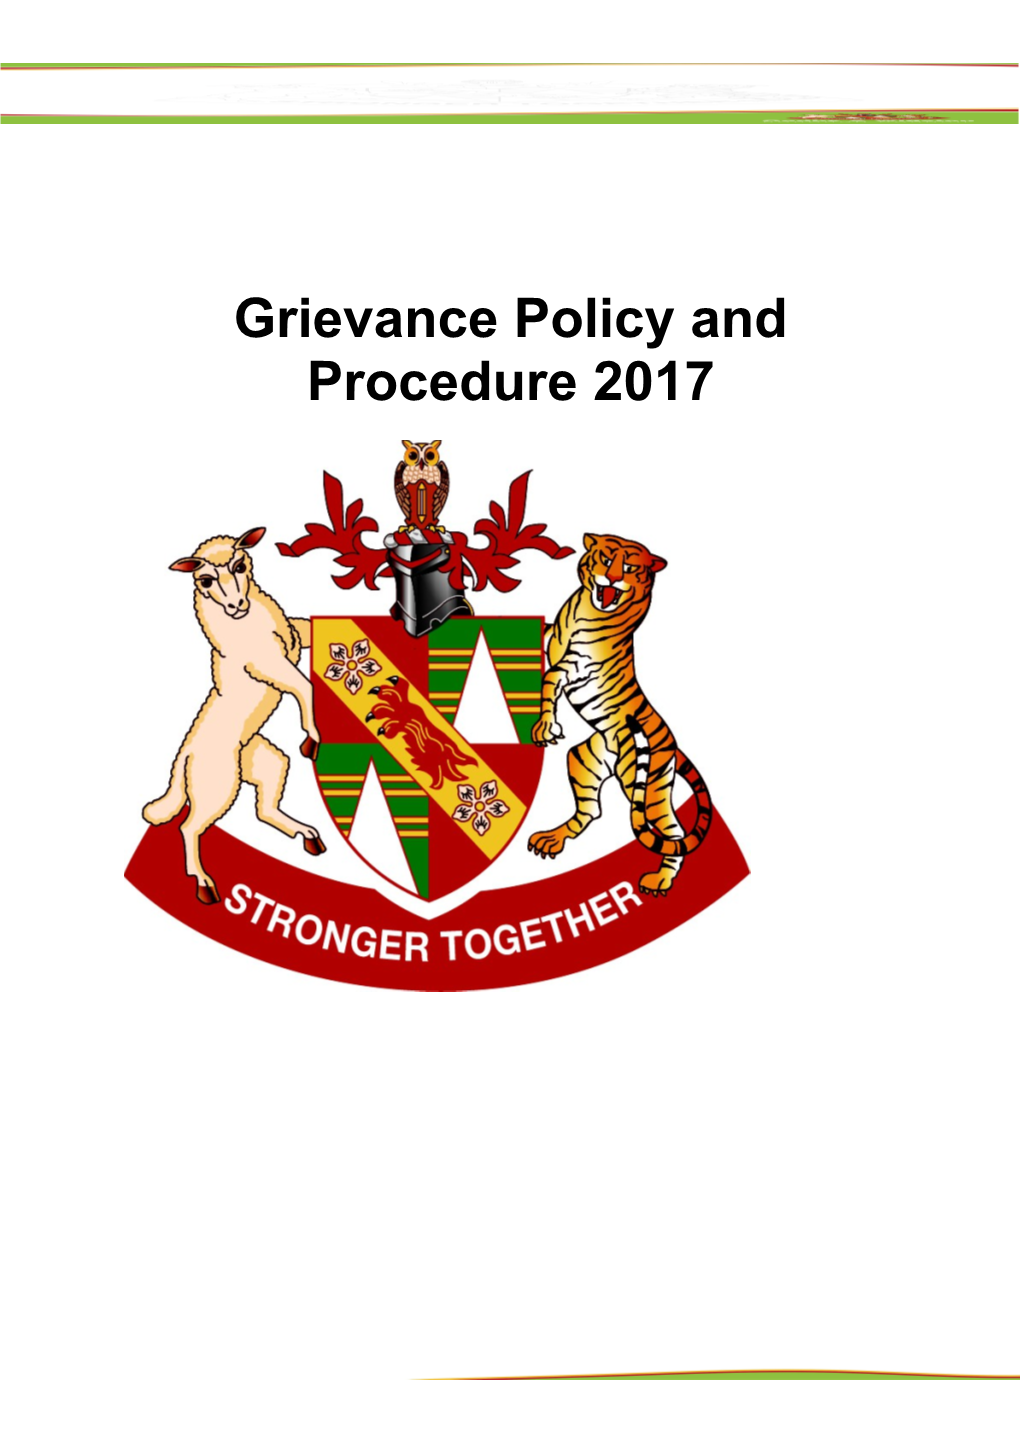 Grievance Policy and Procedure 2017